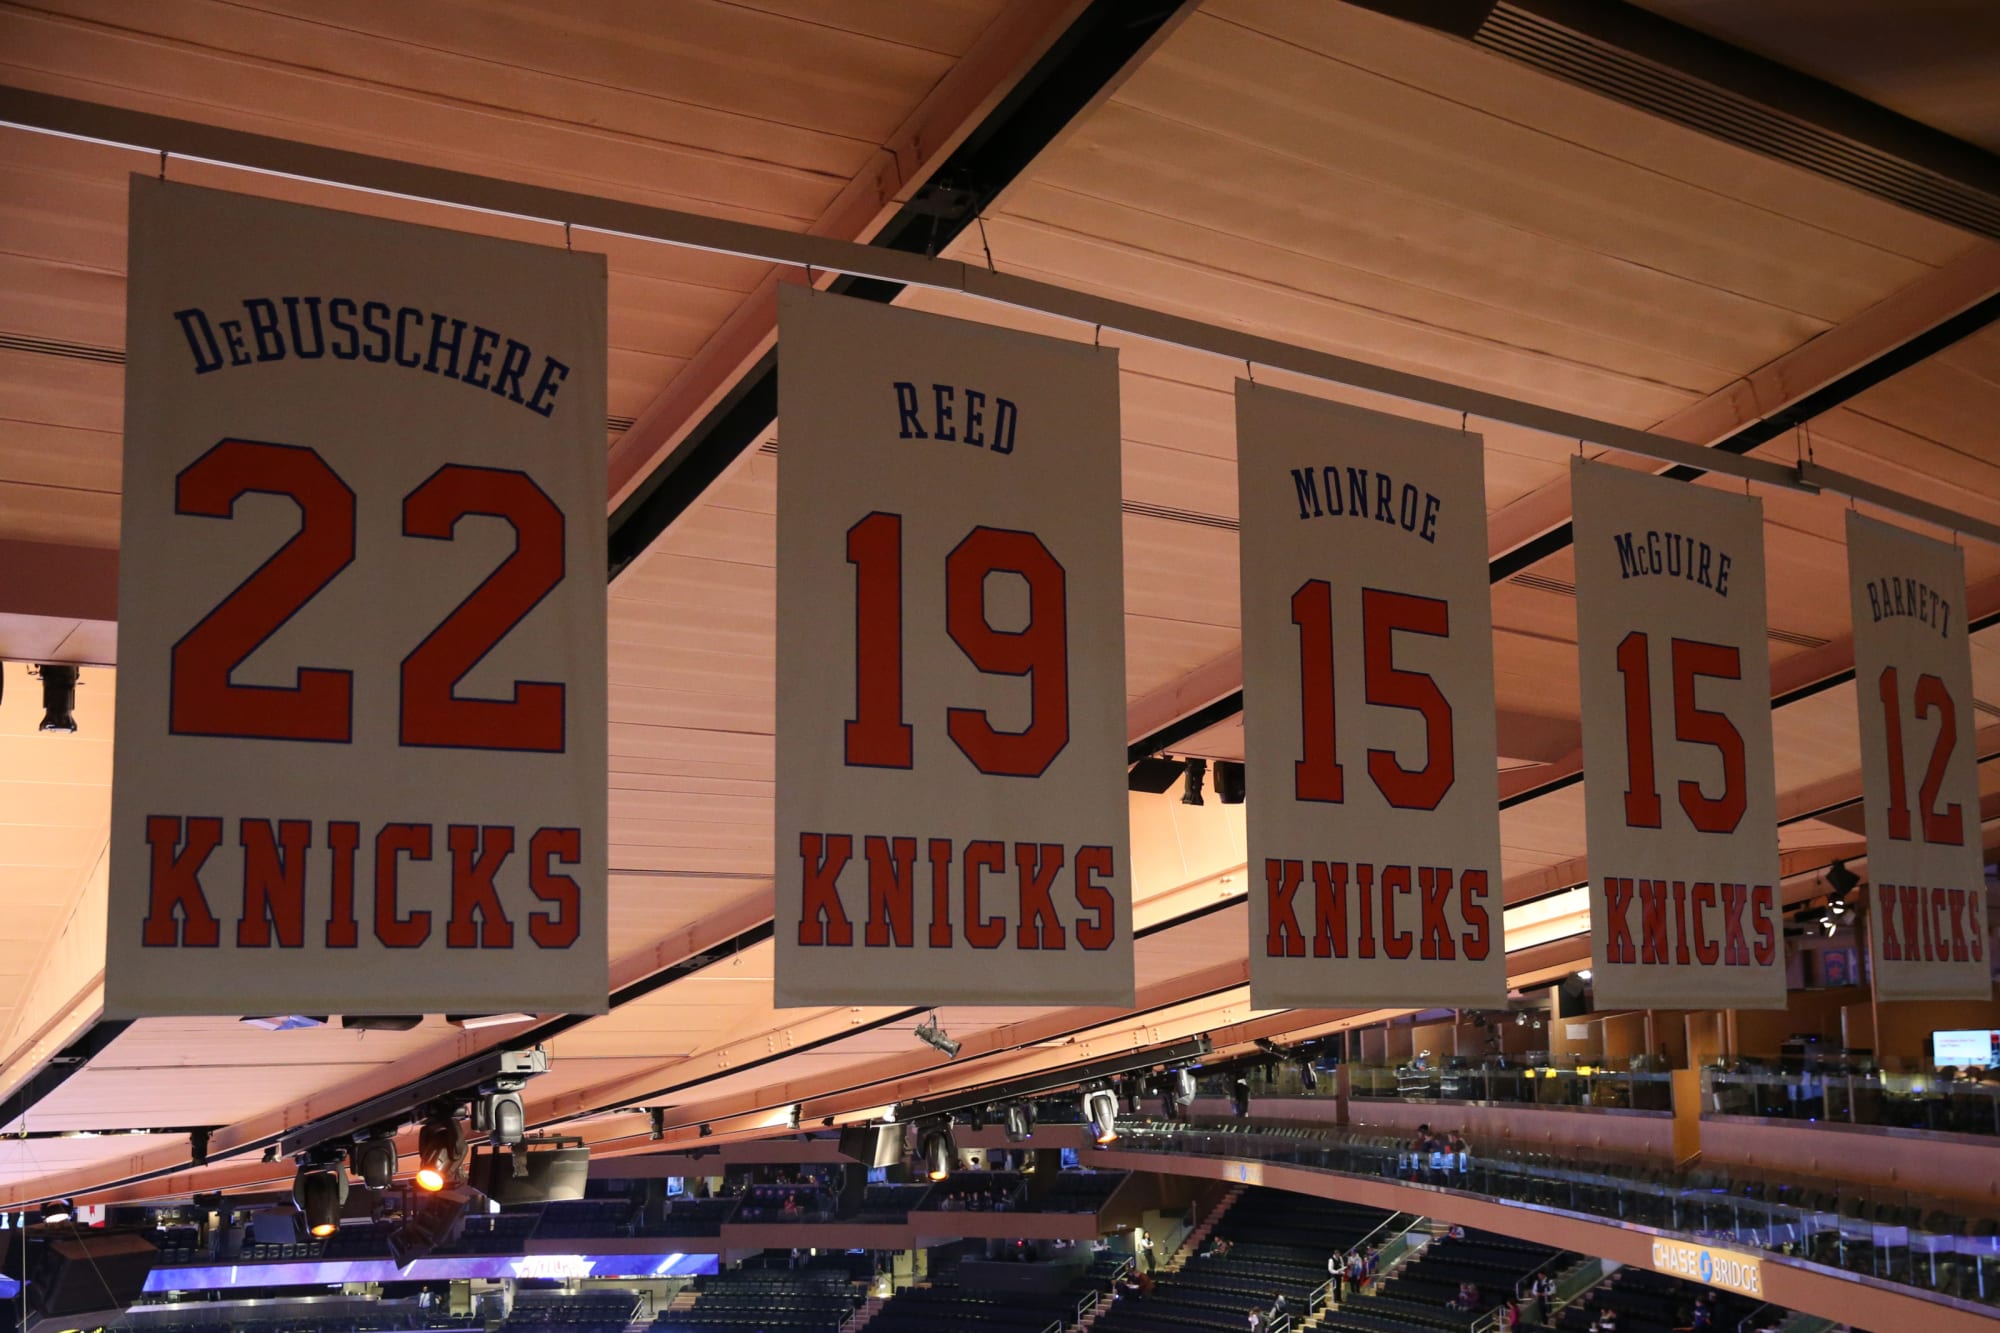 This week in Knicks history: Patrick Ewing's jersey gets retired